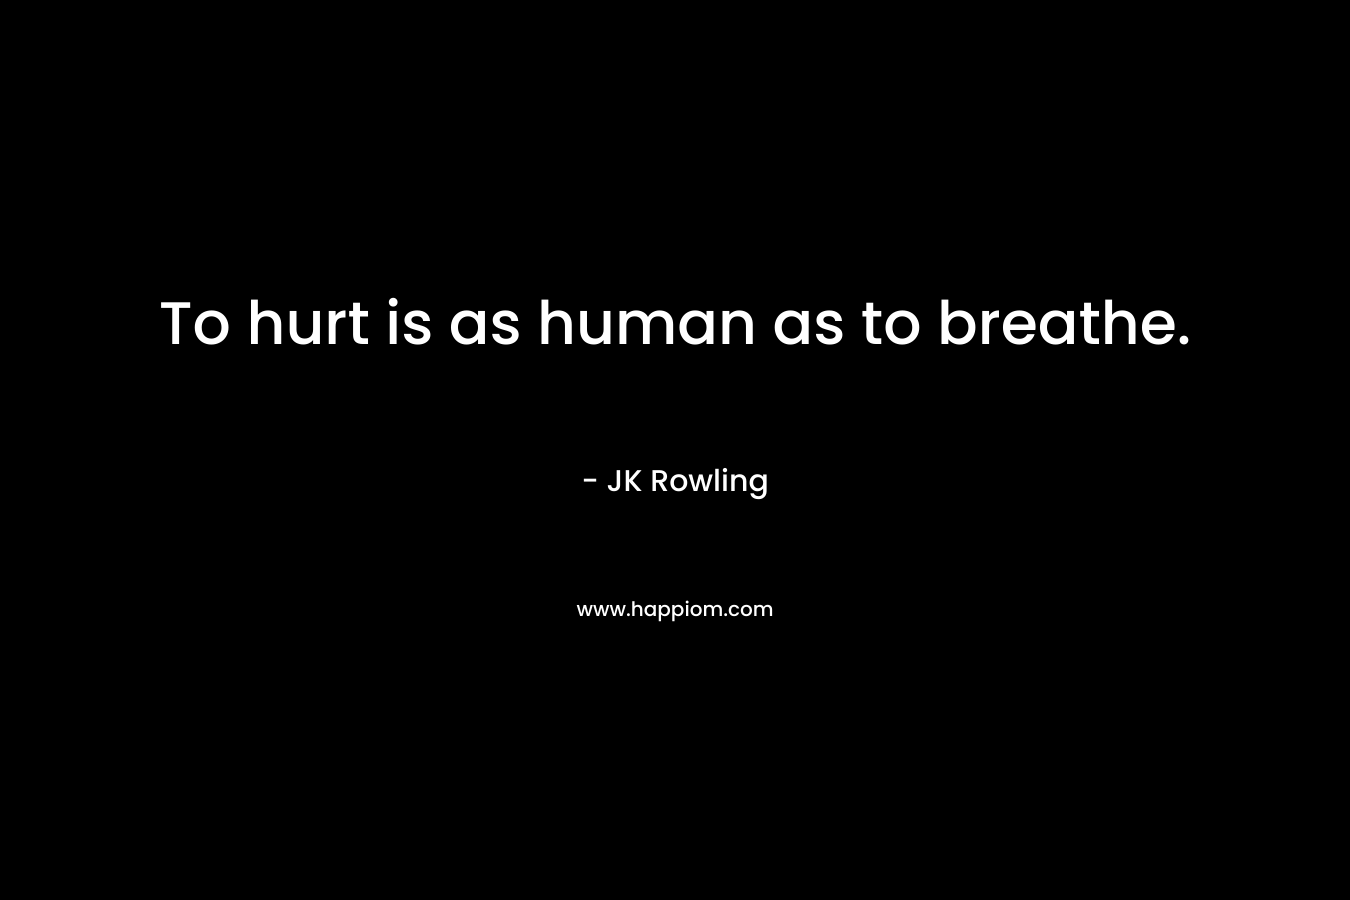 To hurt is as human as to breathe.